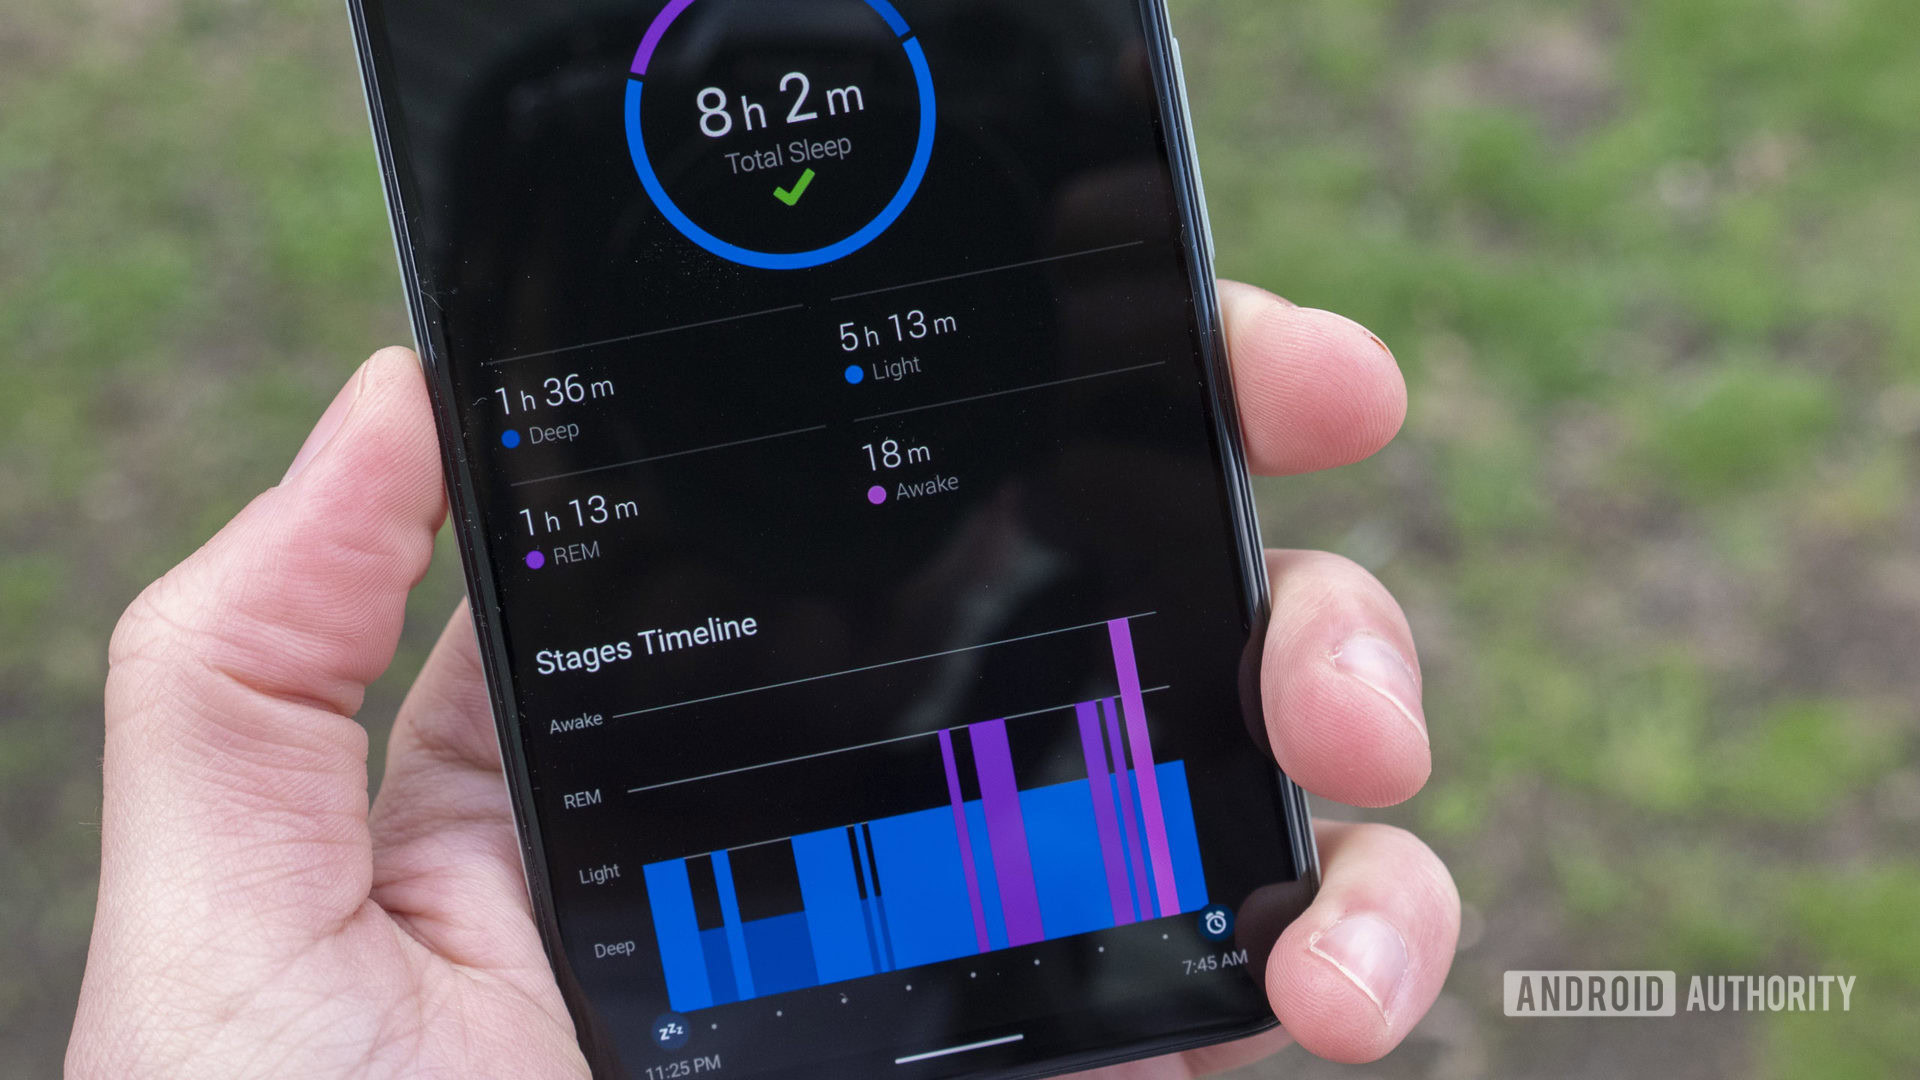 A smartphone shows the Garmin connect app's sleep tracking